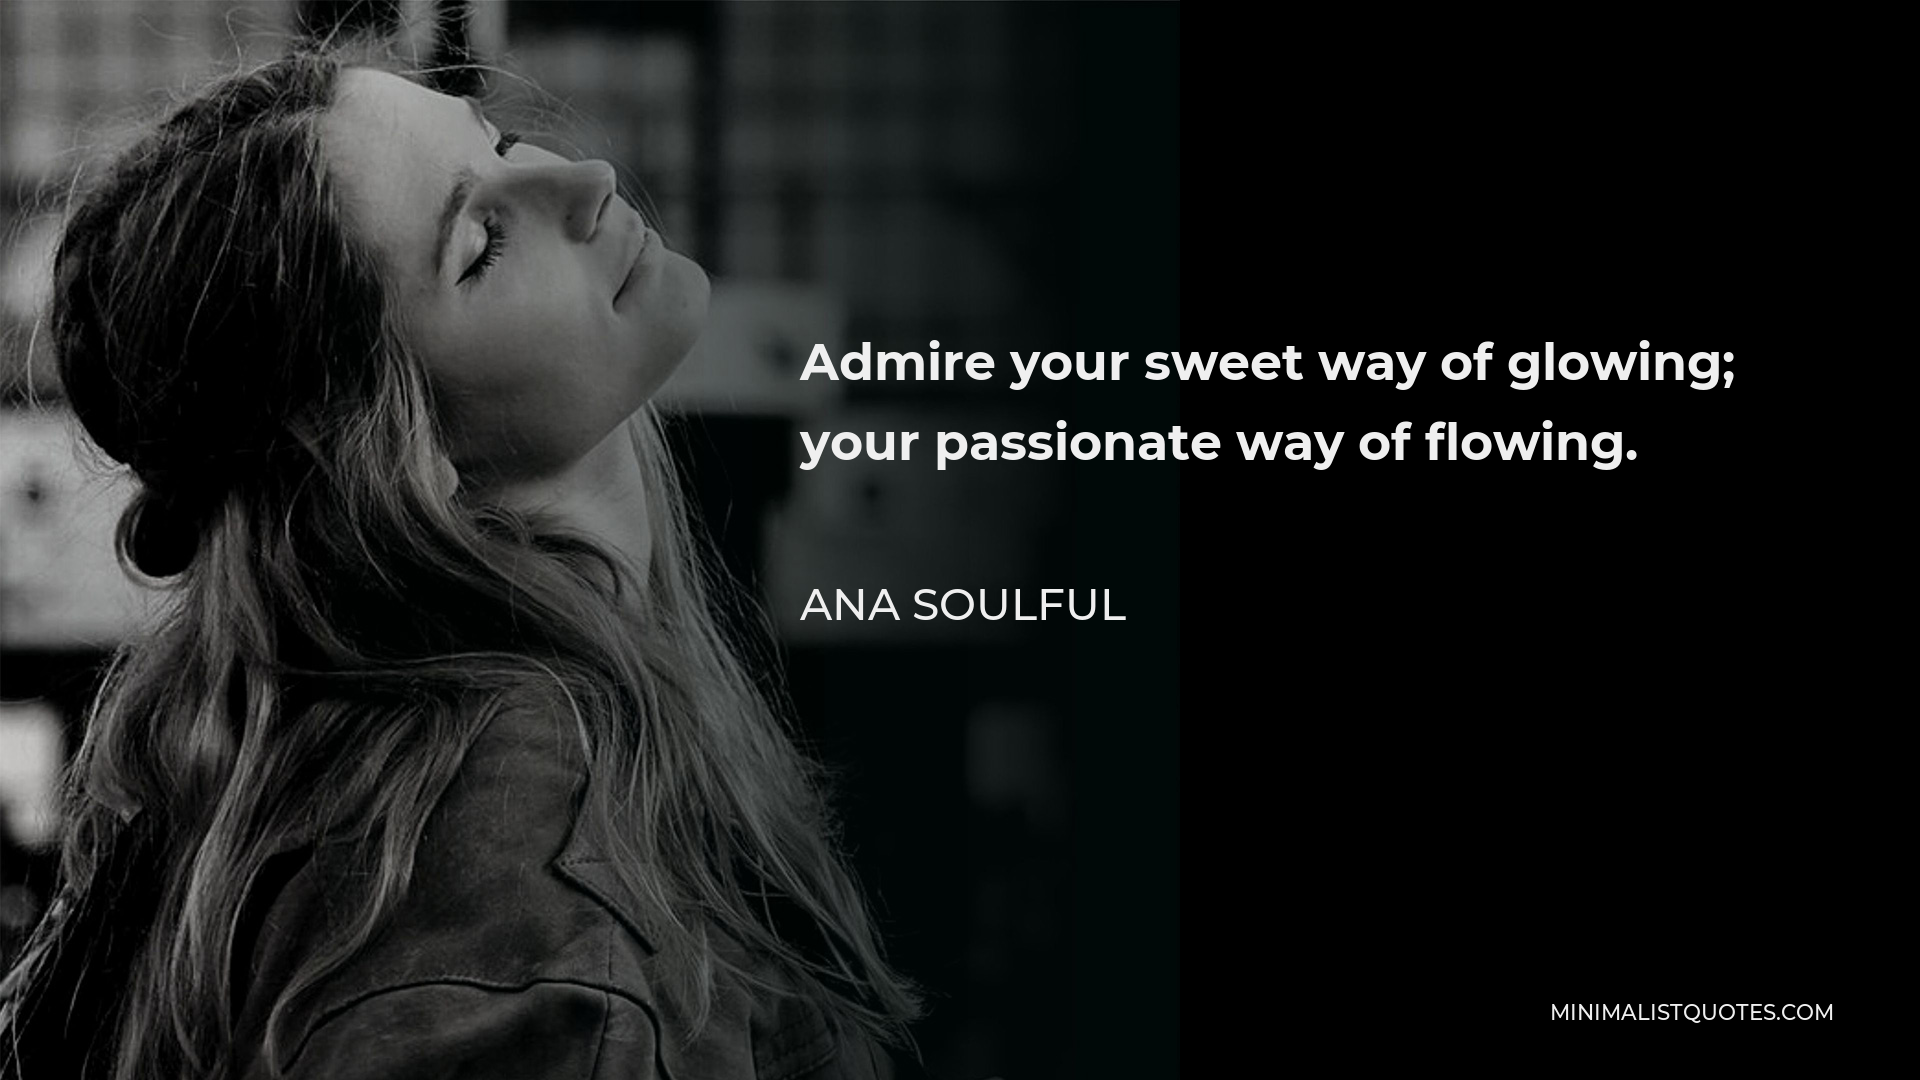 Ana Soulful Quote - Admire your sweet way of glowing; your passionate way of flowing.